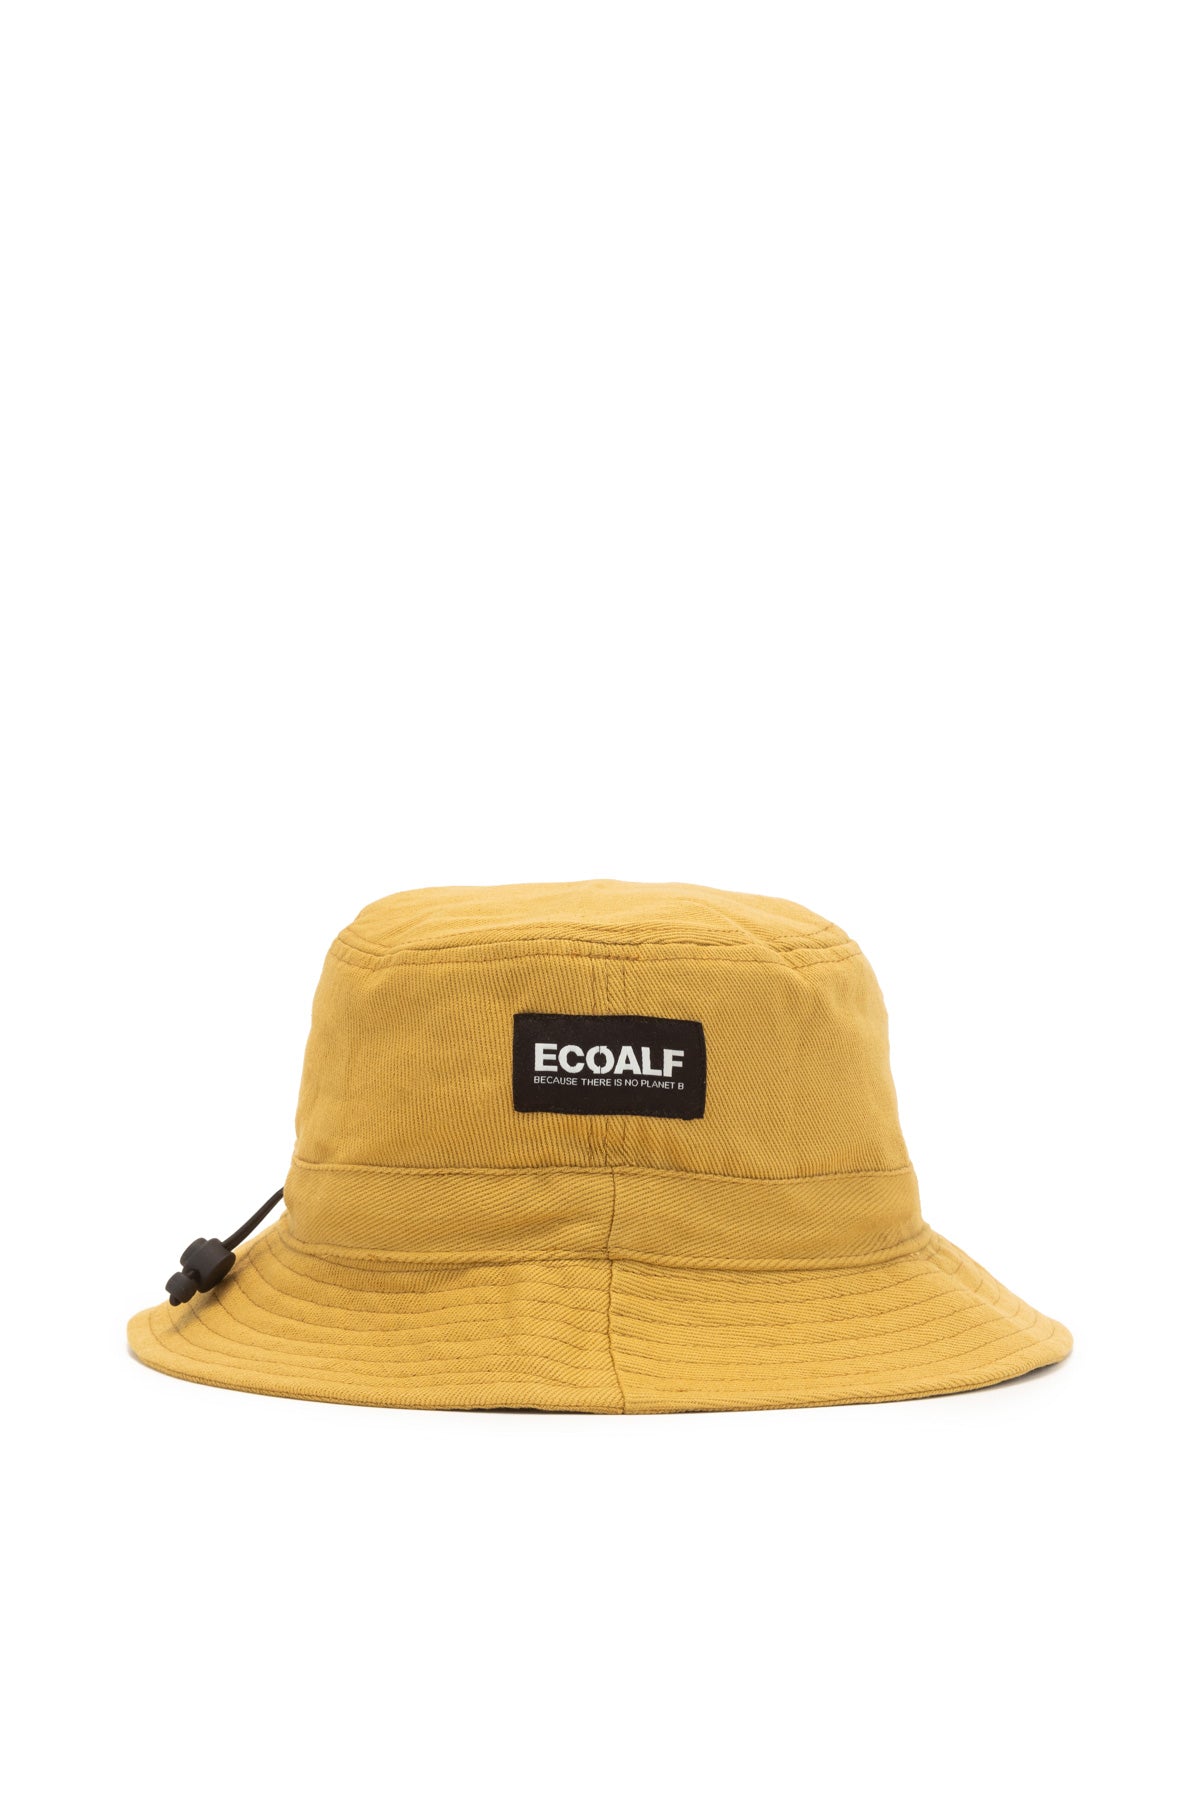 YELLOW FISHER BAS HAT